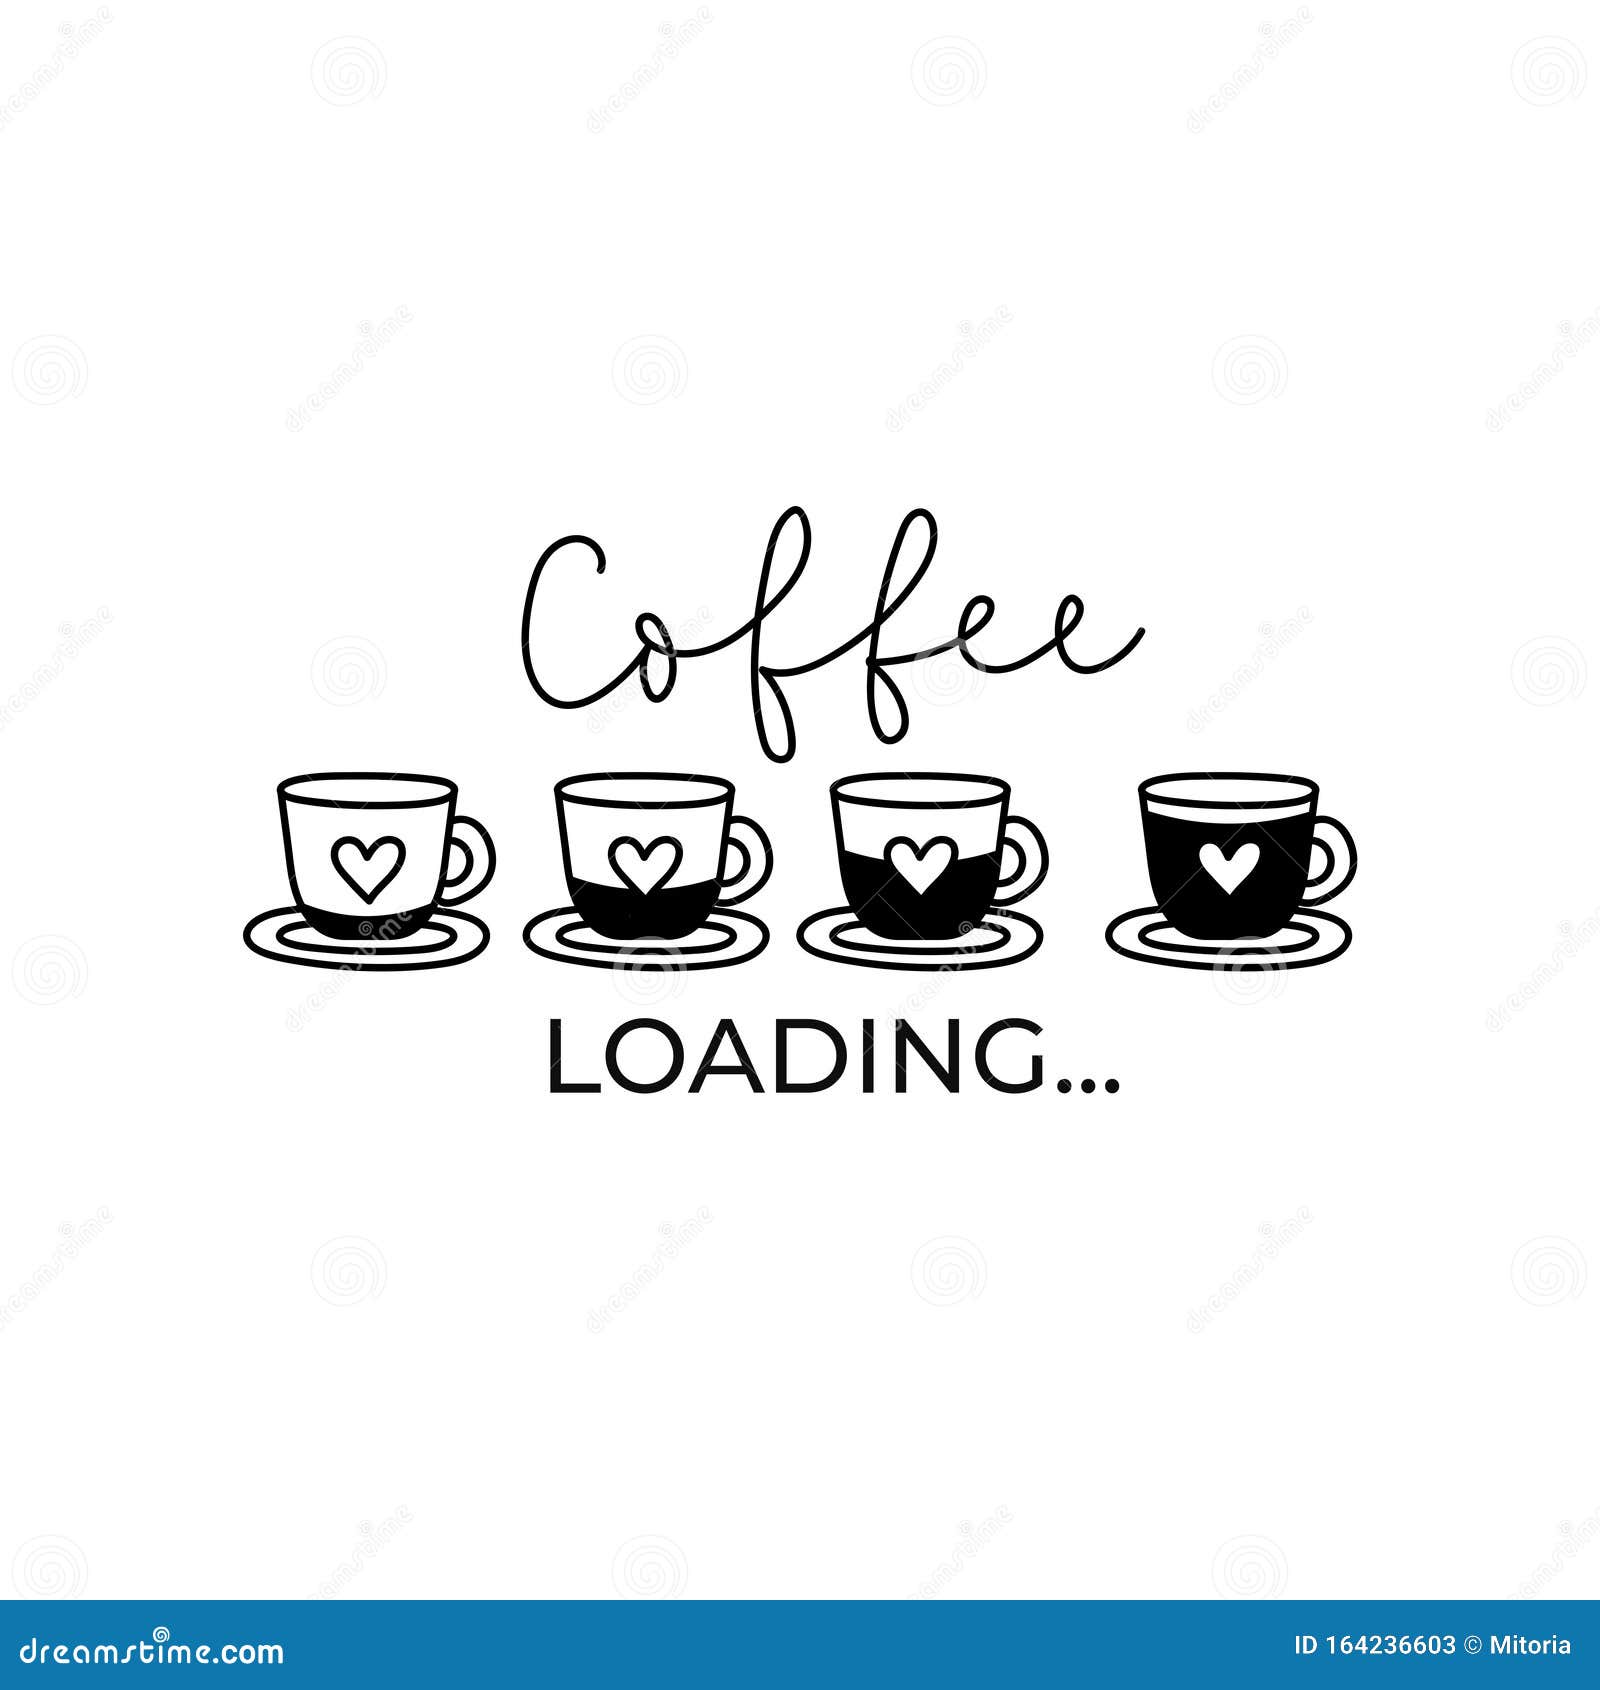 coffee loading funny card or print with lettering